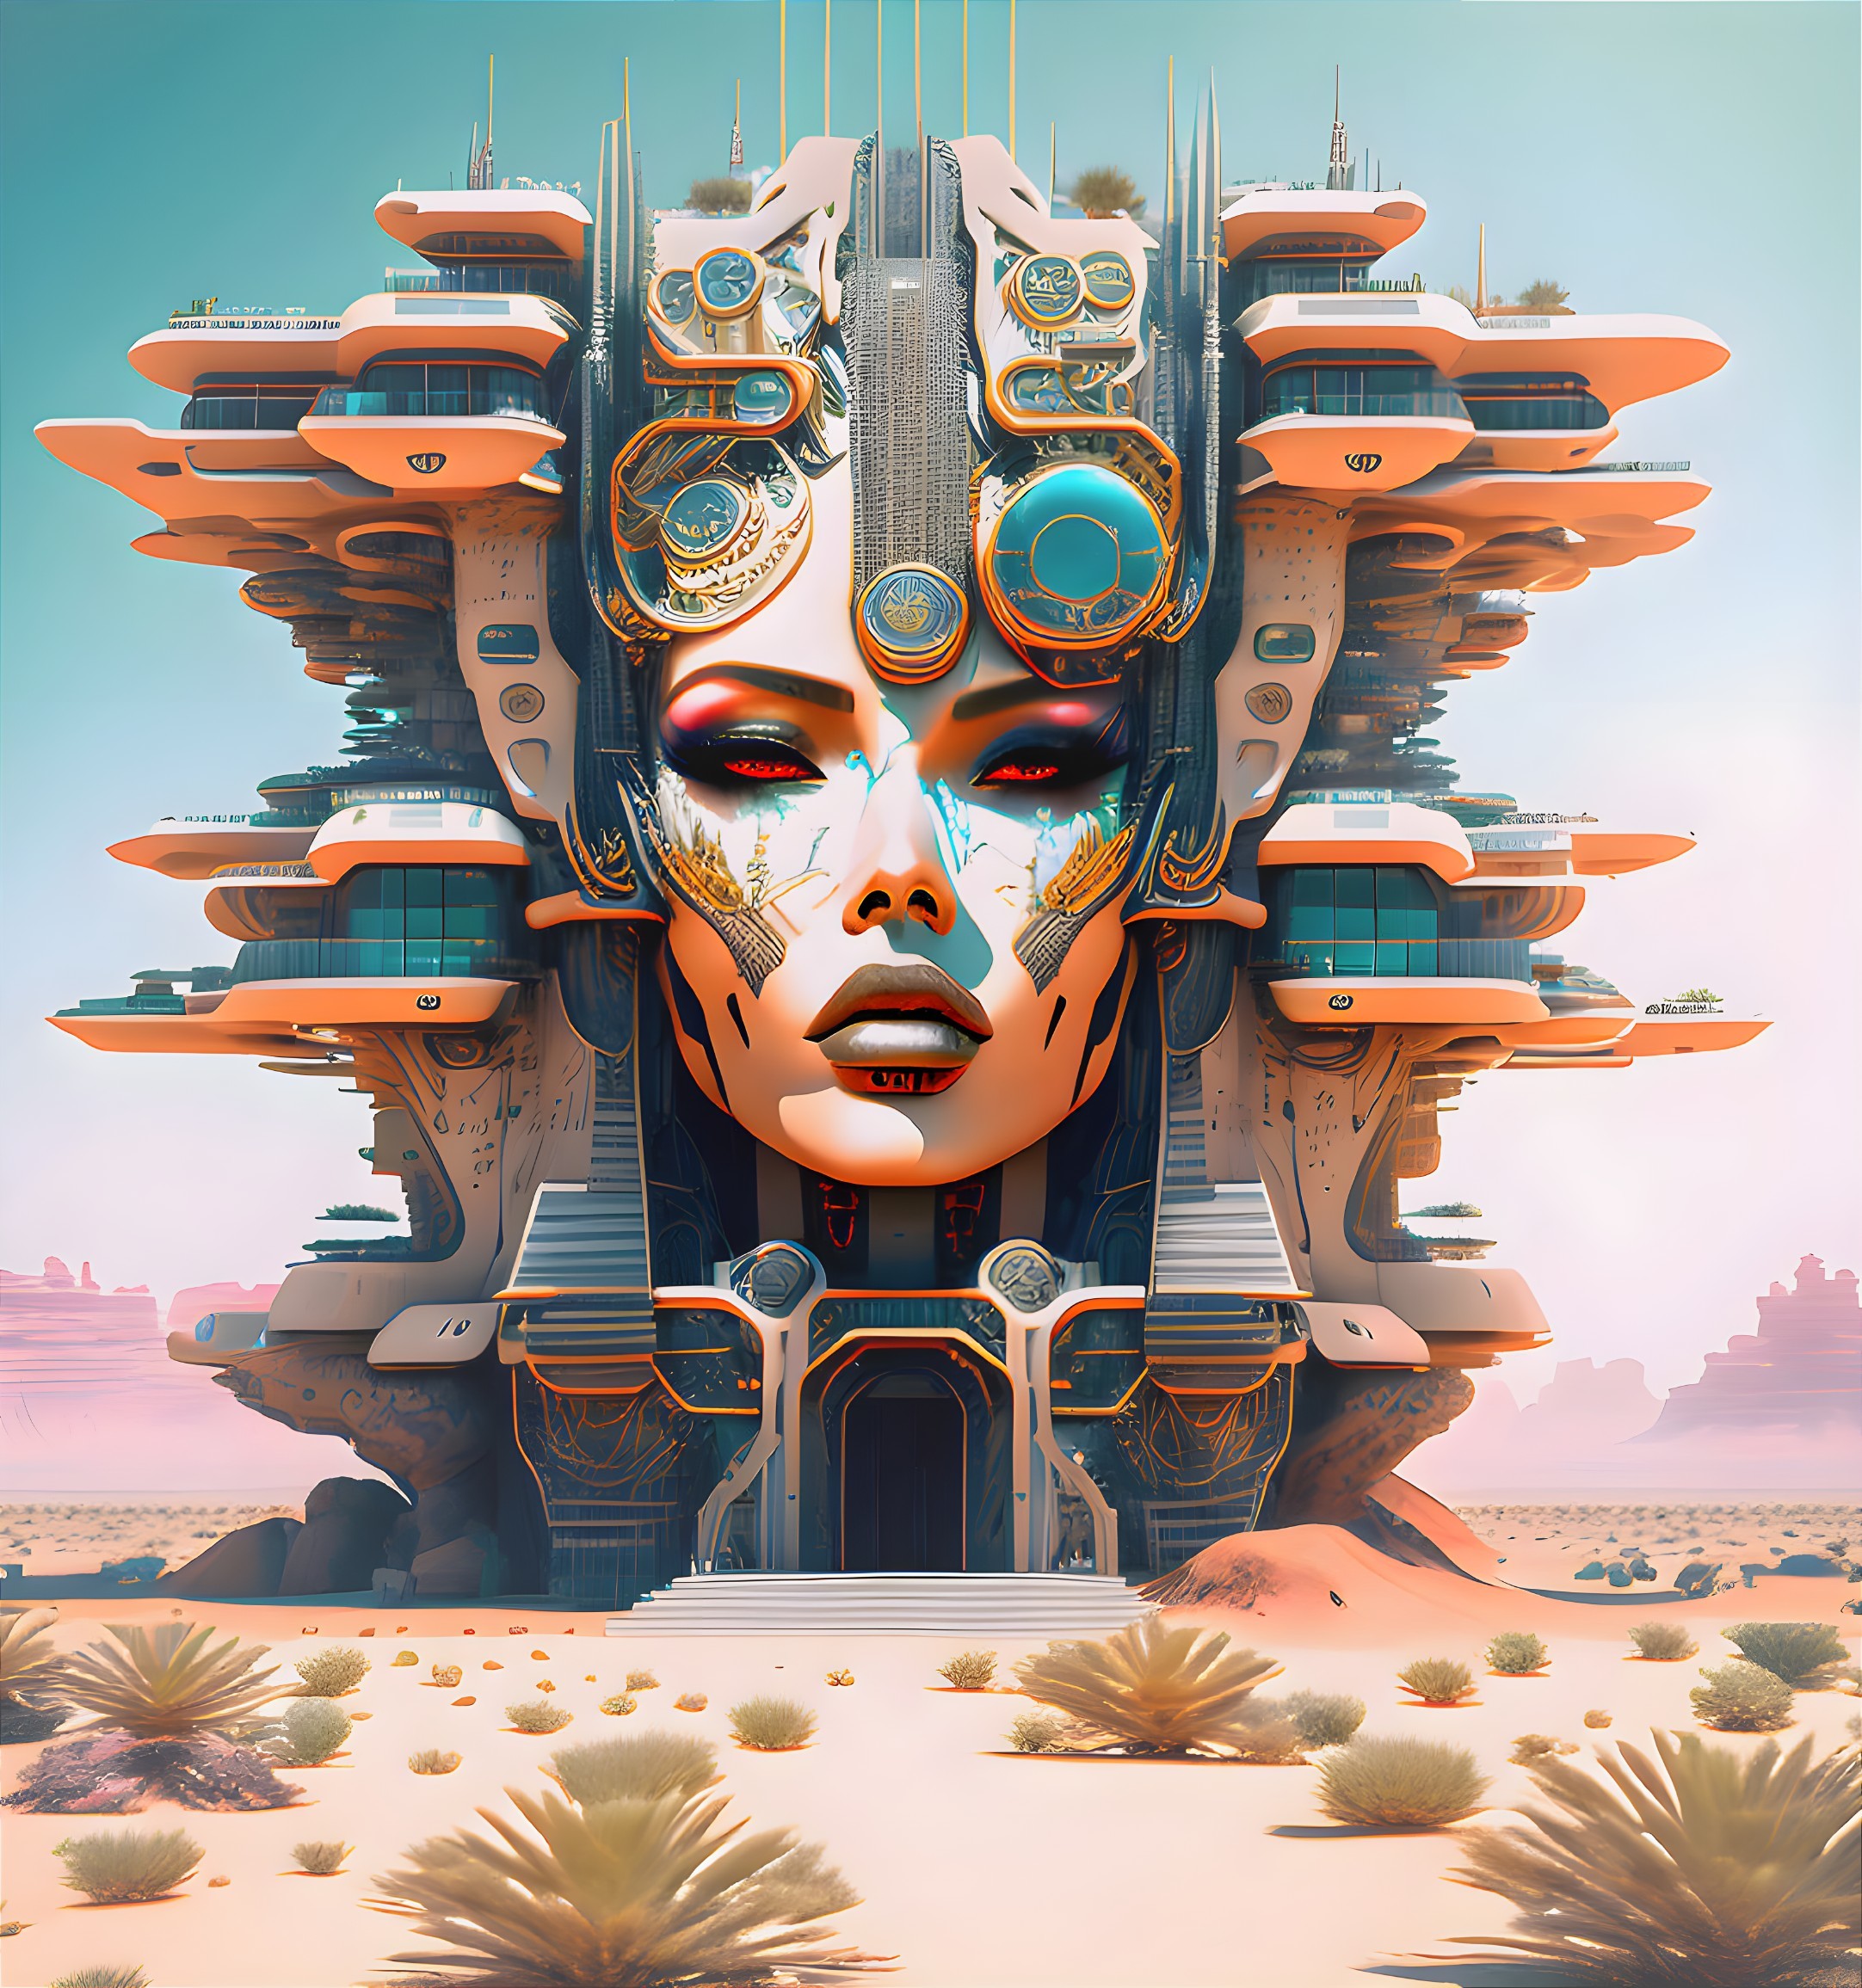 The Place With The Face -- Desert Futurism 